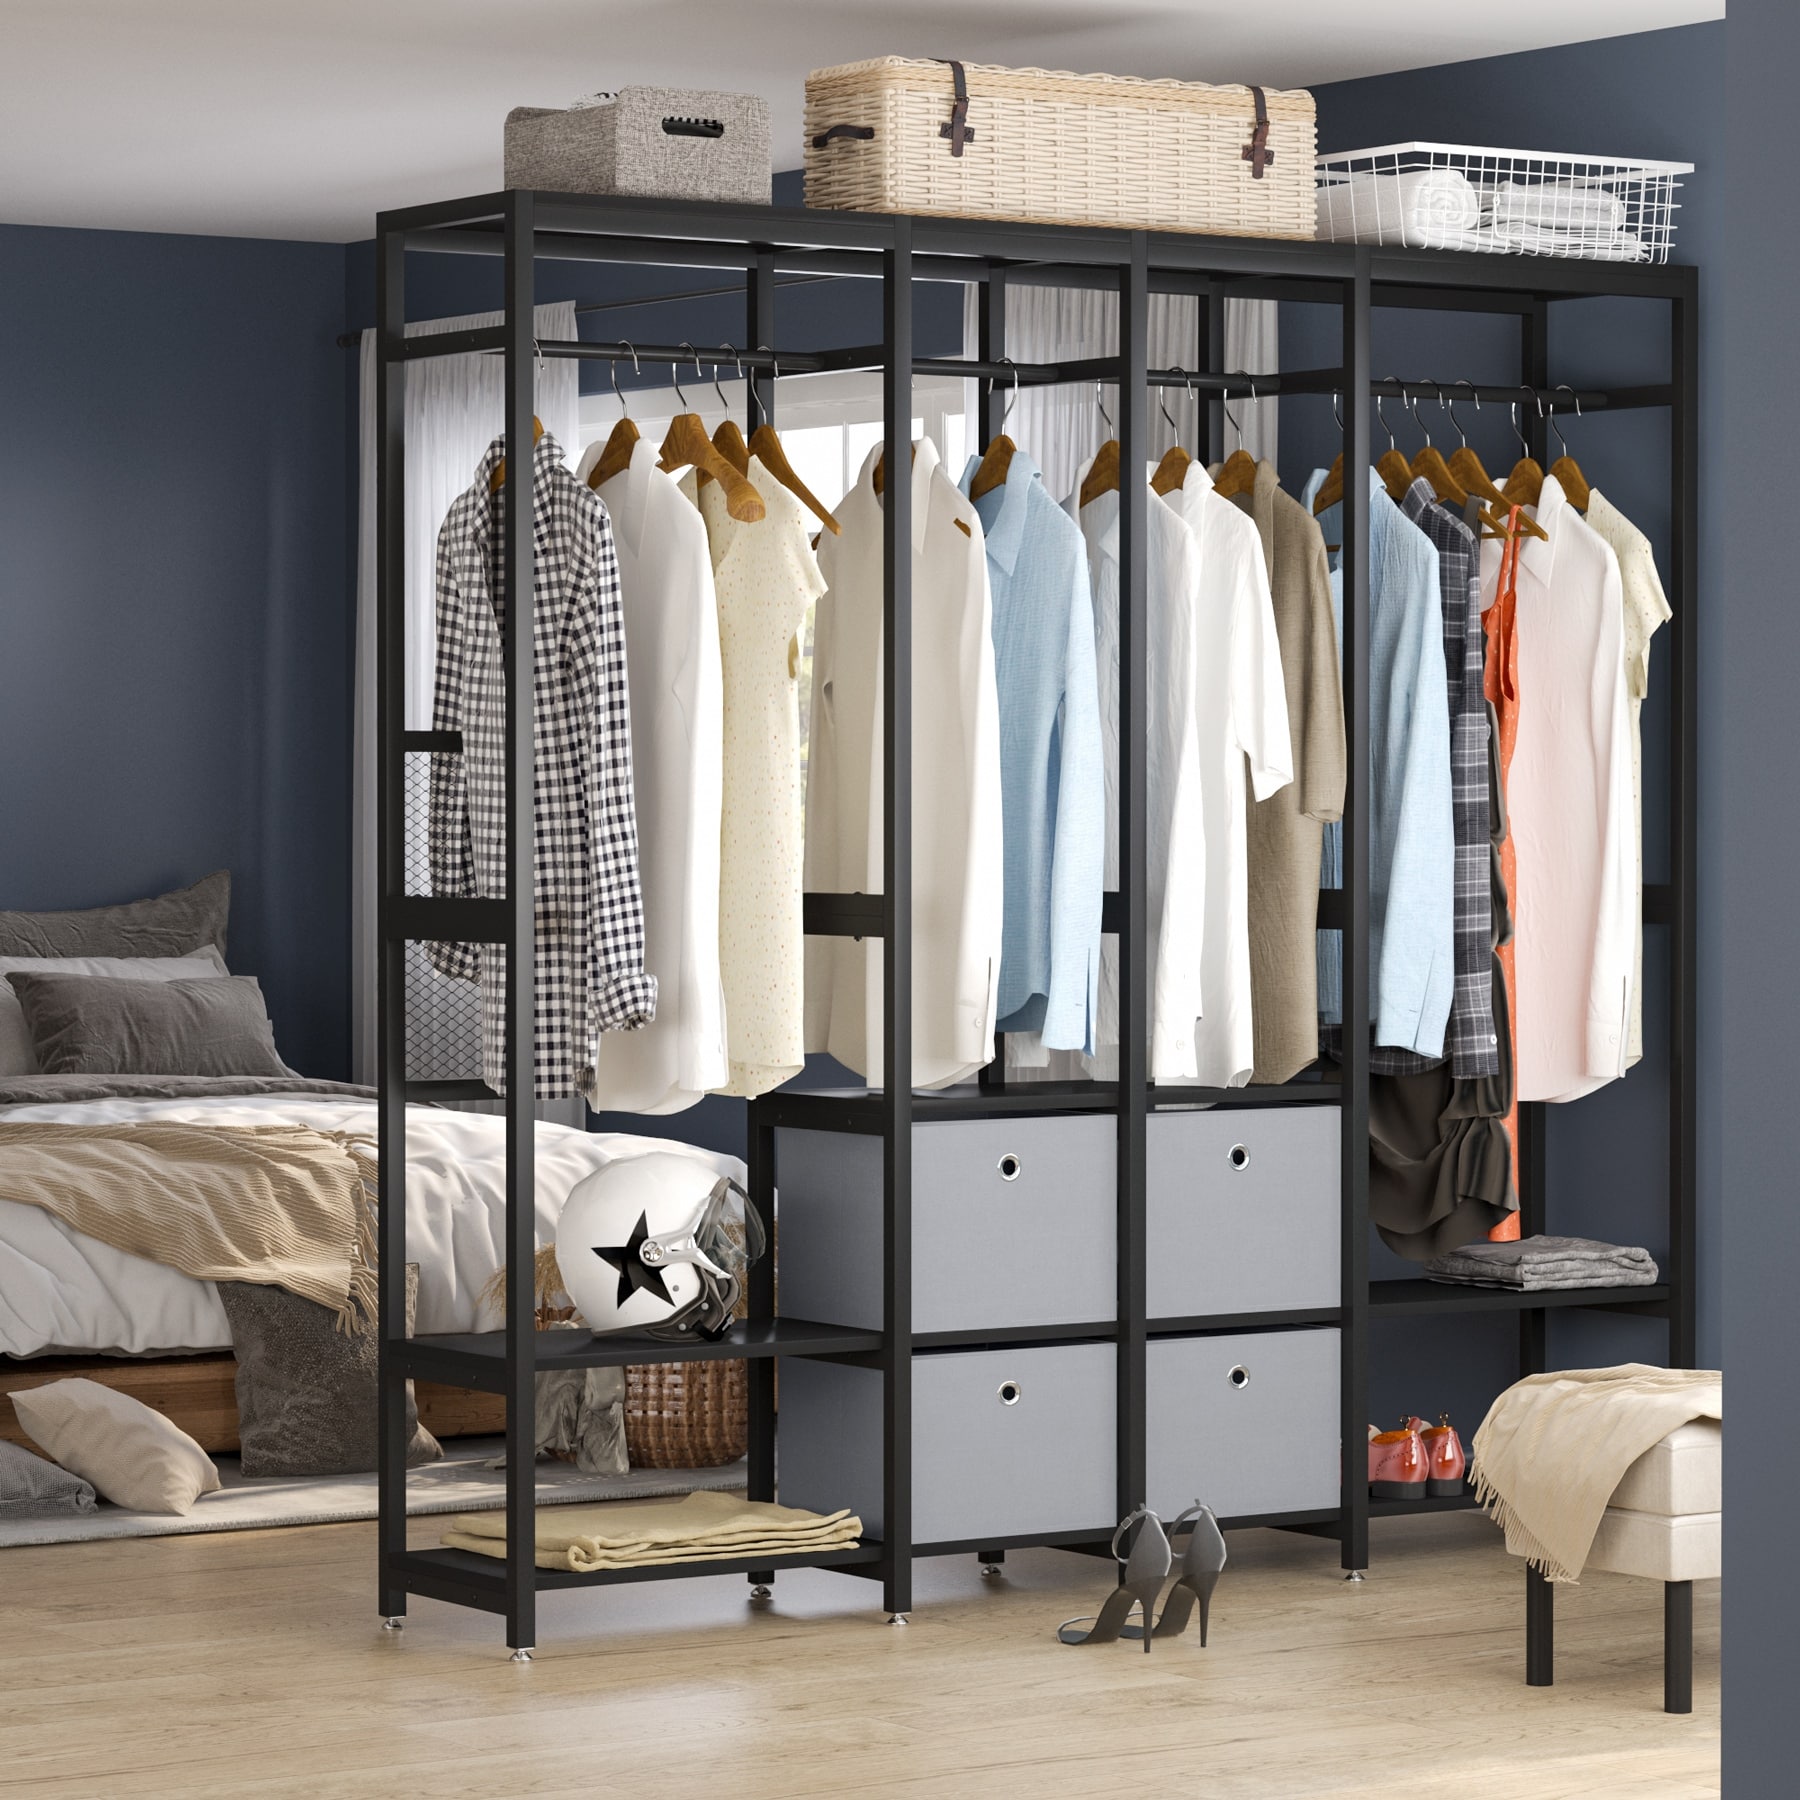 https://ak1.ostkcdn.com/images/products/is/images/direct/a6ac6001e68d4c88c6b87dd8e29b7daaffe216c9/Extra-Large-Freestanding-Closet-Organizer-with-Shelves-and-Hanging-Rods.jpg